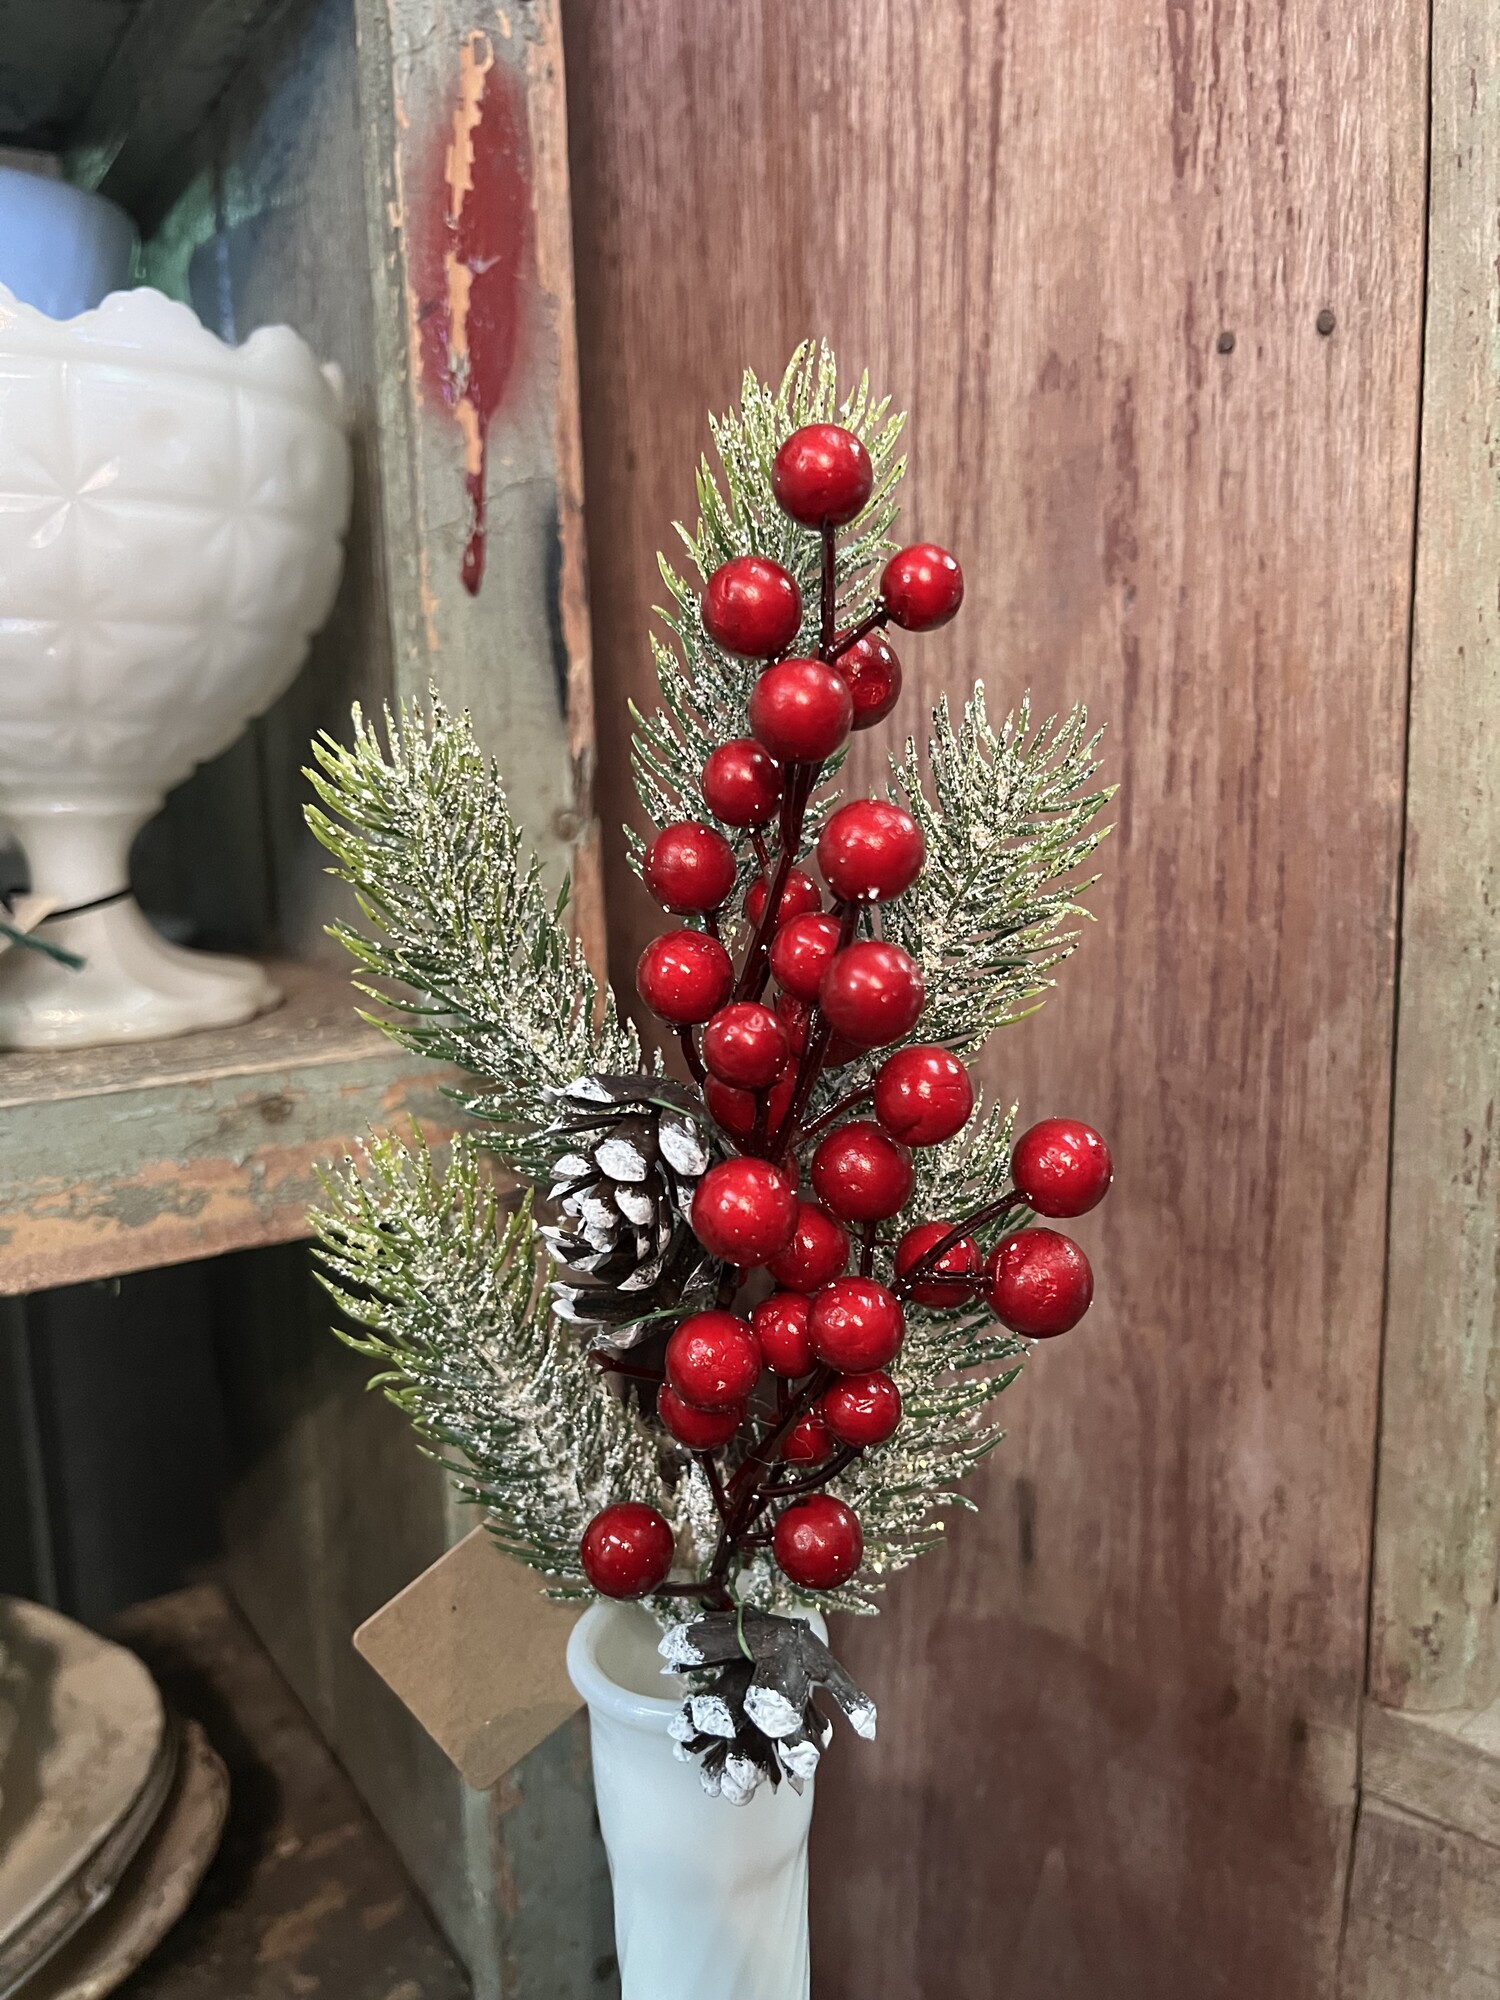 The Berry And Pine Stem measures 17 inches high.
Its mixture of berries, pinecones and snowy greenery with just a touch of gliter make this a perfect stem to just drop in any vase